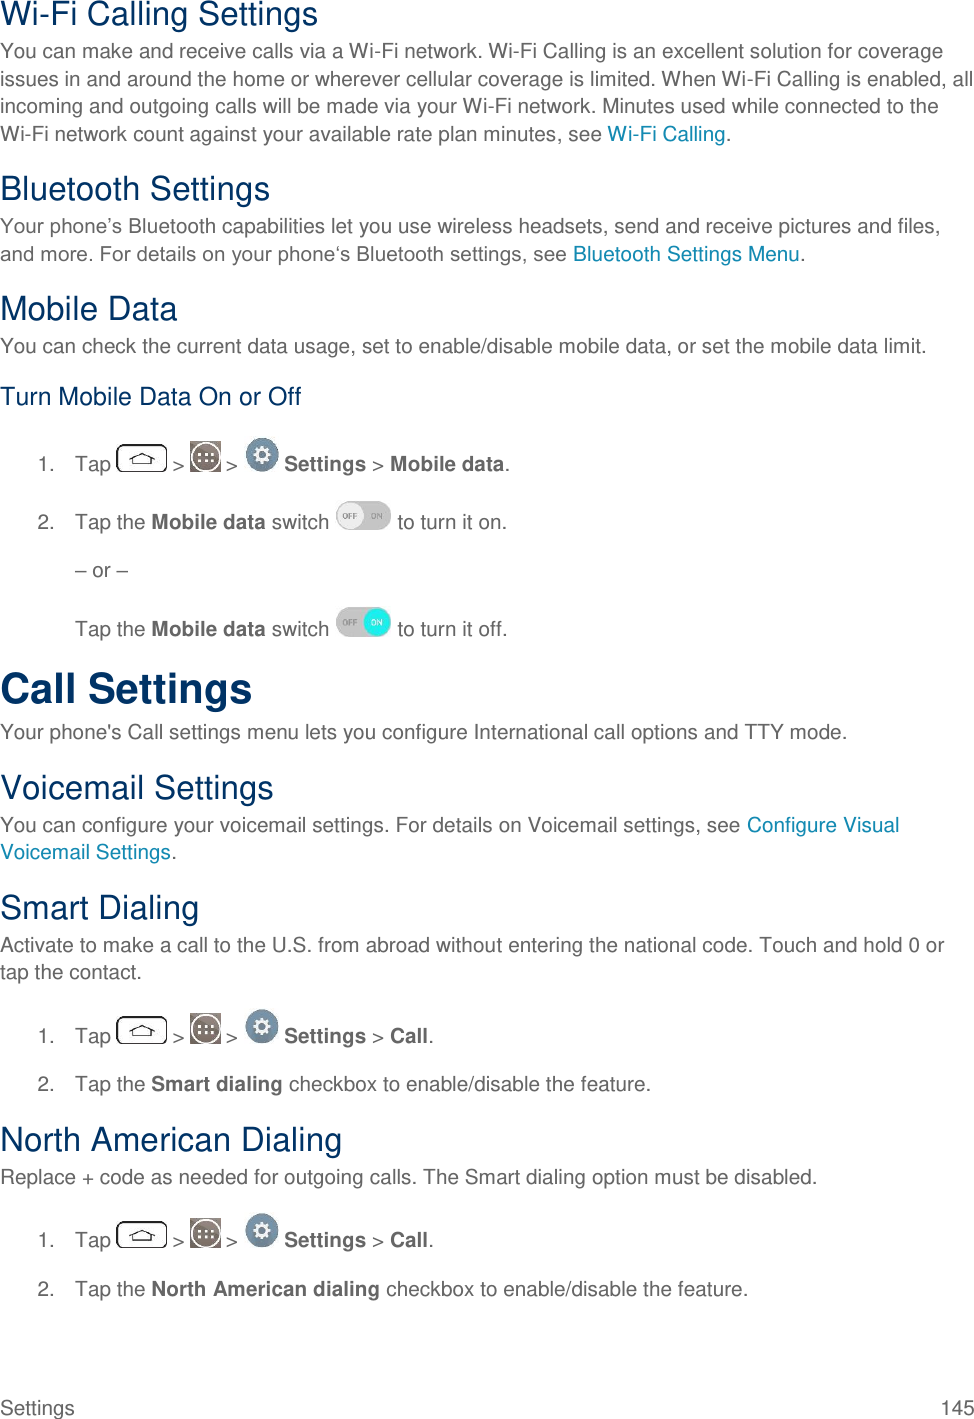 Settings  145 Wi-Fi Calling Settings You can make and receive calls via a Wi-Fi network. Wi-Fi Calling is an excellent solution for coverage issues in and around the home or wherever cellular coverage is limited. When Wi-Fi Calling is enabled, all incoming and outgoing calls will be made via your Wi-Fi network. Minutes used while connected to the Wi-Fi network count against your available rate plan minutes, see Wi-Fi Calling. Bluetooth Settings Your phone‘s Bluetooth capabilities let you use wireless headsets, send and receive pictures and files, and more. For details on your phone‗s Bluetooth settings, see Bluetooth Settings Menu. Mobile Data You can check the current data usage, set to enable/disable mobile data, or set the mobile data limit. Turn Mobile Data On or Off 1.  Tap   &gt;   &gt;   Settings &gt; Mobile data.  2.  Tap the Mobile data switch   to turn it on.  – or –  Tap the Mobile data switch   to turn it off. Call Settings Your phone&apos;s Call settings menu lets you configure International call options and TTY mode. Voicemail Settings  You can configure your voicemail settings. For details on Voicemail settings, see Configure Visual Voicemail Settings. Smart Dialing Activate to make a call to the U.S. from abroad without entering the national code. Touch and hold 0 or tap the contact. 1.  Tap   &gt;   &gt;   Settings &gt; Call. 2.  Tap the Smart dialing checkbox to enable/disable the feature. North American Dialing Replace + code as needed for outgoing calls. The Smart dialing option must be disabled. 1.  Tap   &gt;   &gt;   Settings &gt; Call. 2.  Tap the North American dialing checkbox to enable/disable the feature. 